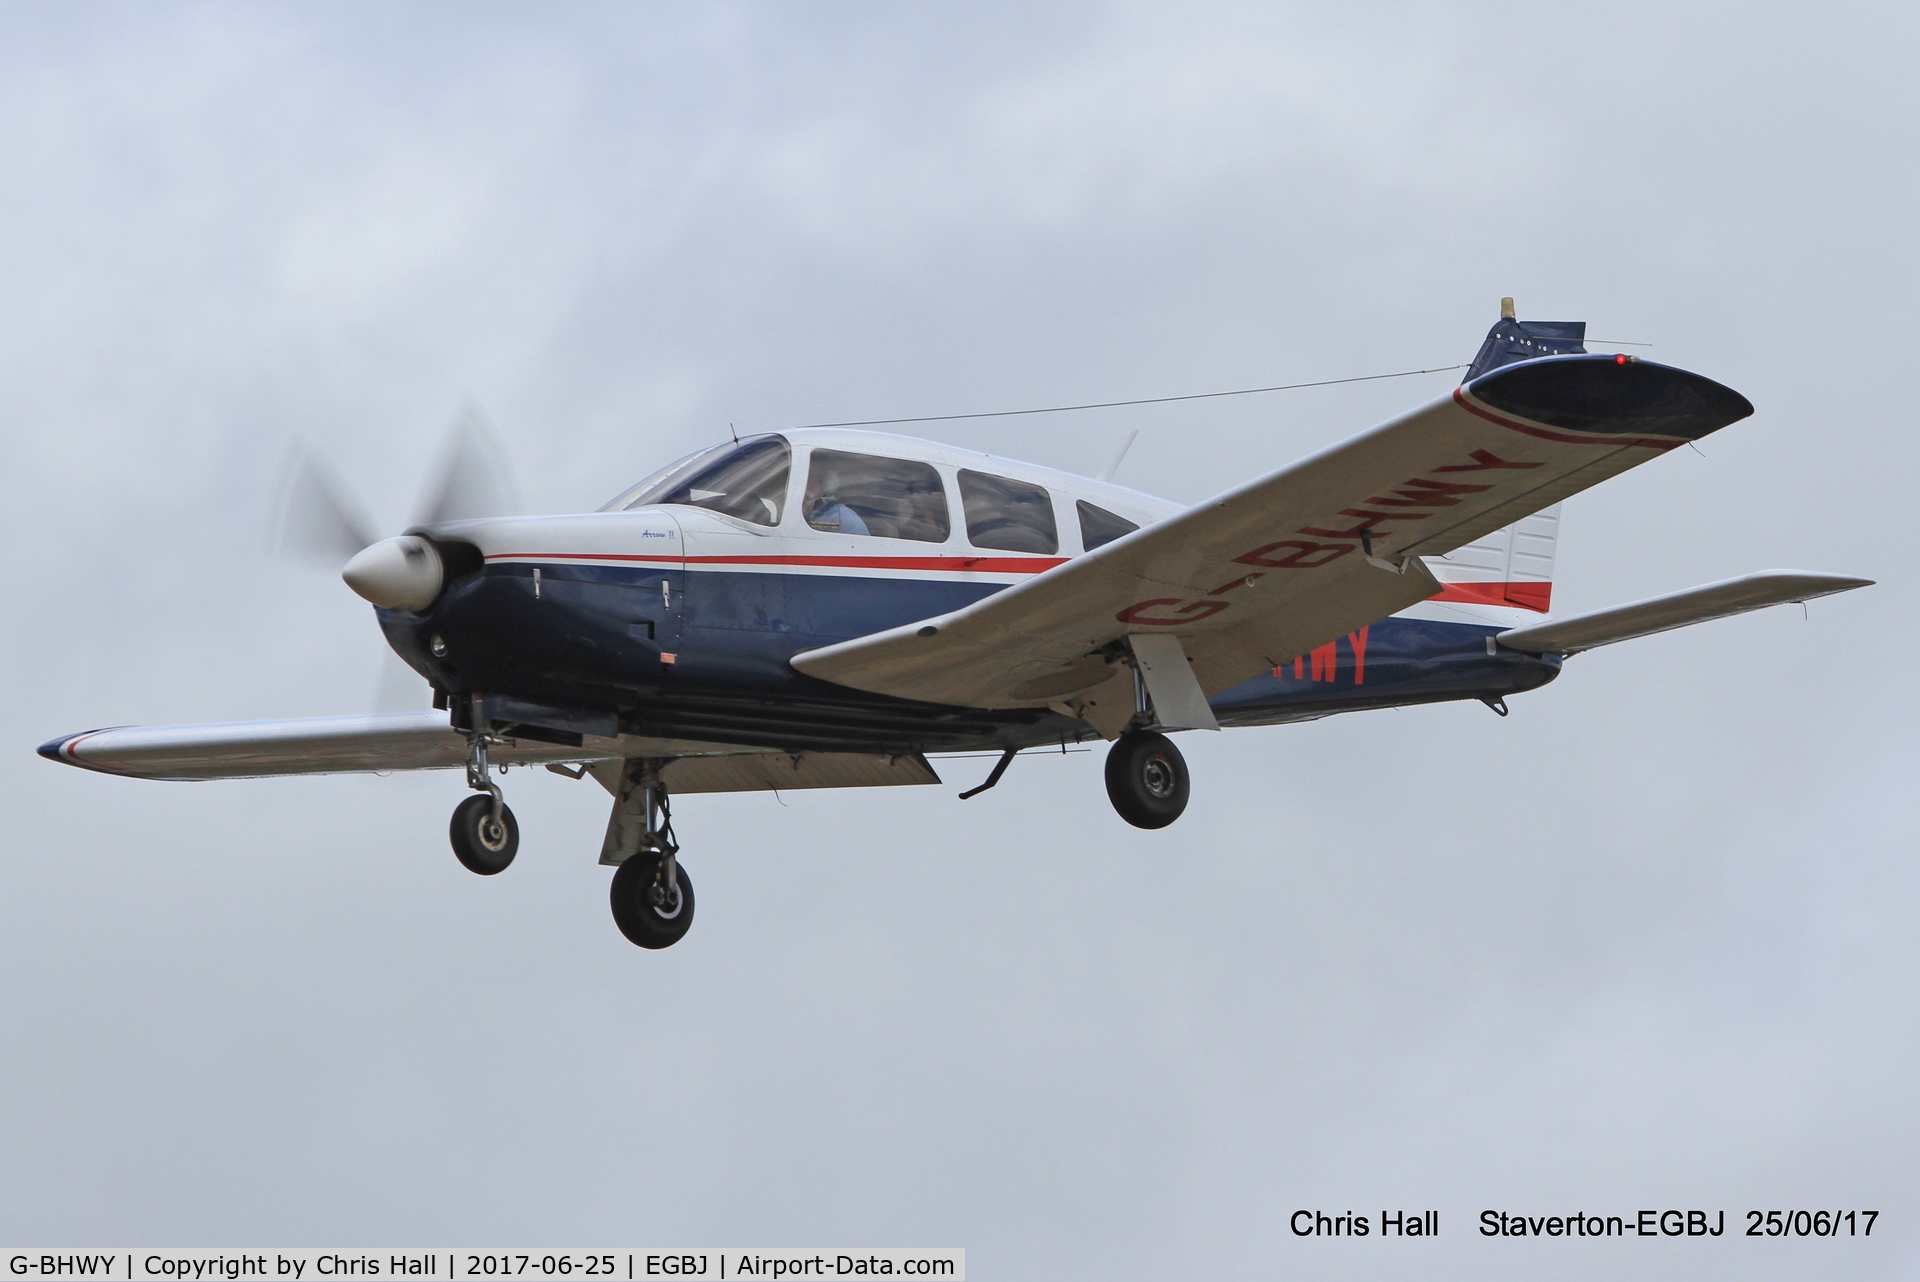 G-BHWY, 1973 Piper PA-28R-200-2 Cherokee Arrow II C/N 28R-7435059, Project Propeller at Staverton